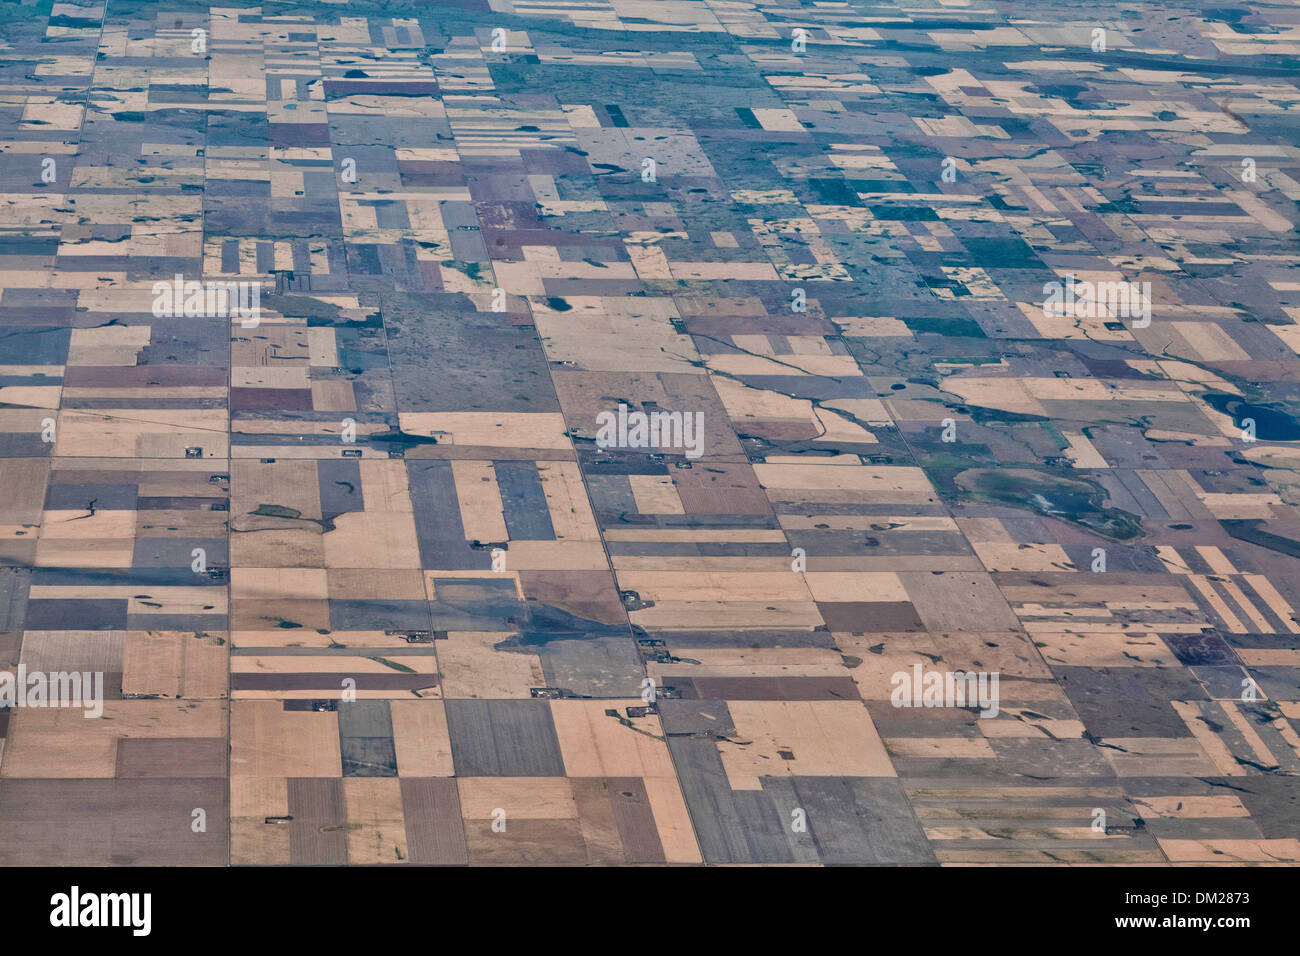 A look at the patchwork pattern of the Canadian Prairie fields from an airplane window in the sky Stock Photo